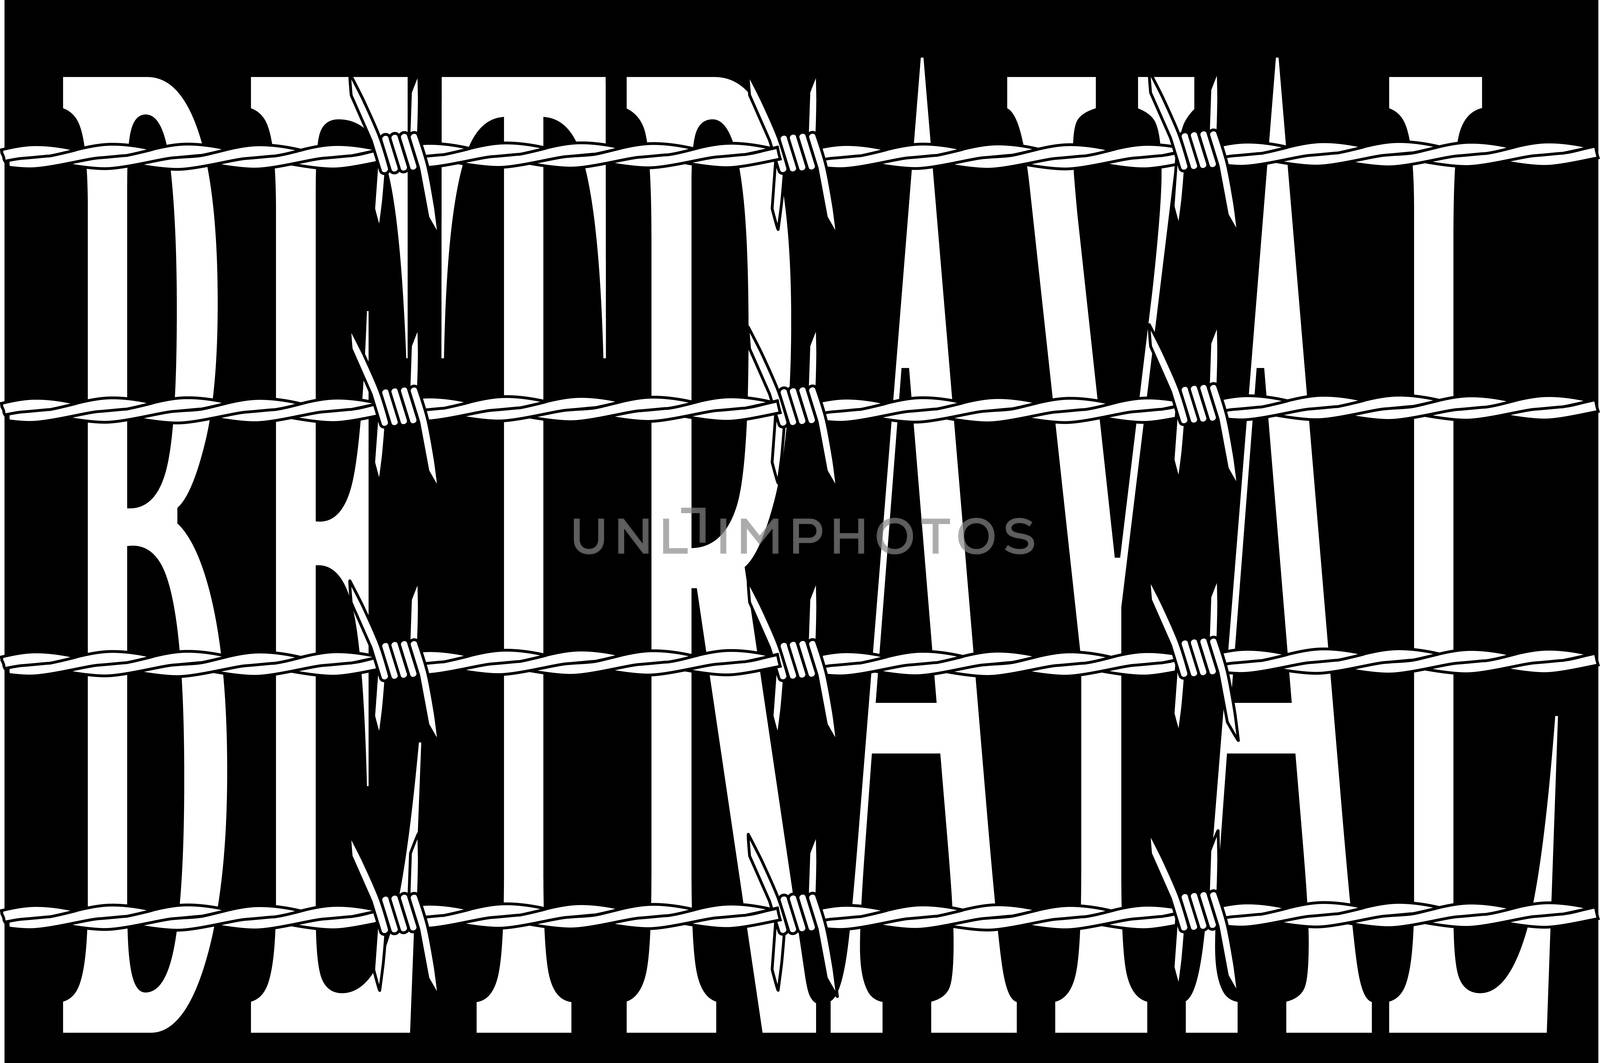 The word BETRAYAL behind a barbed wire fence over a black background